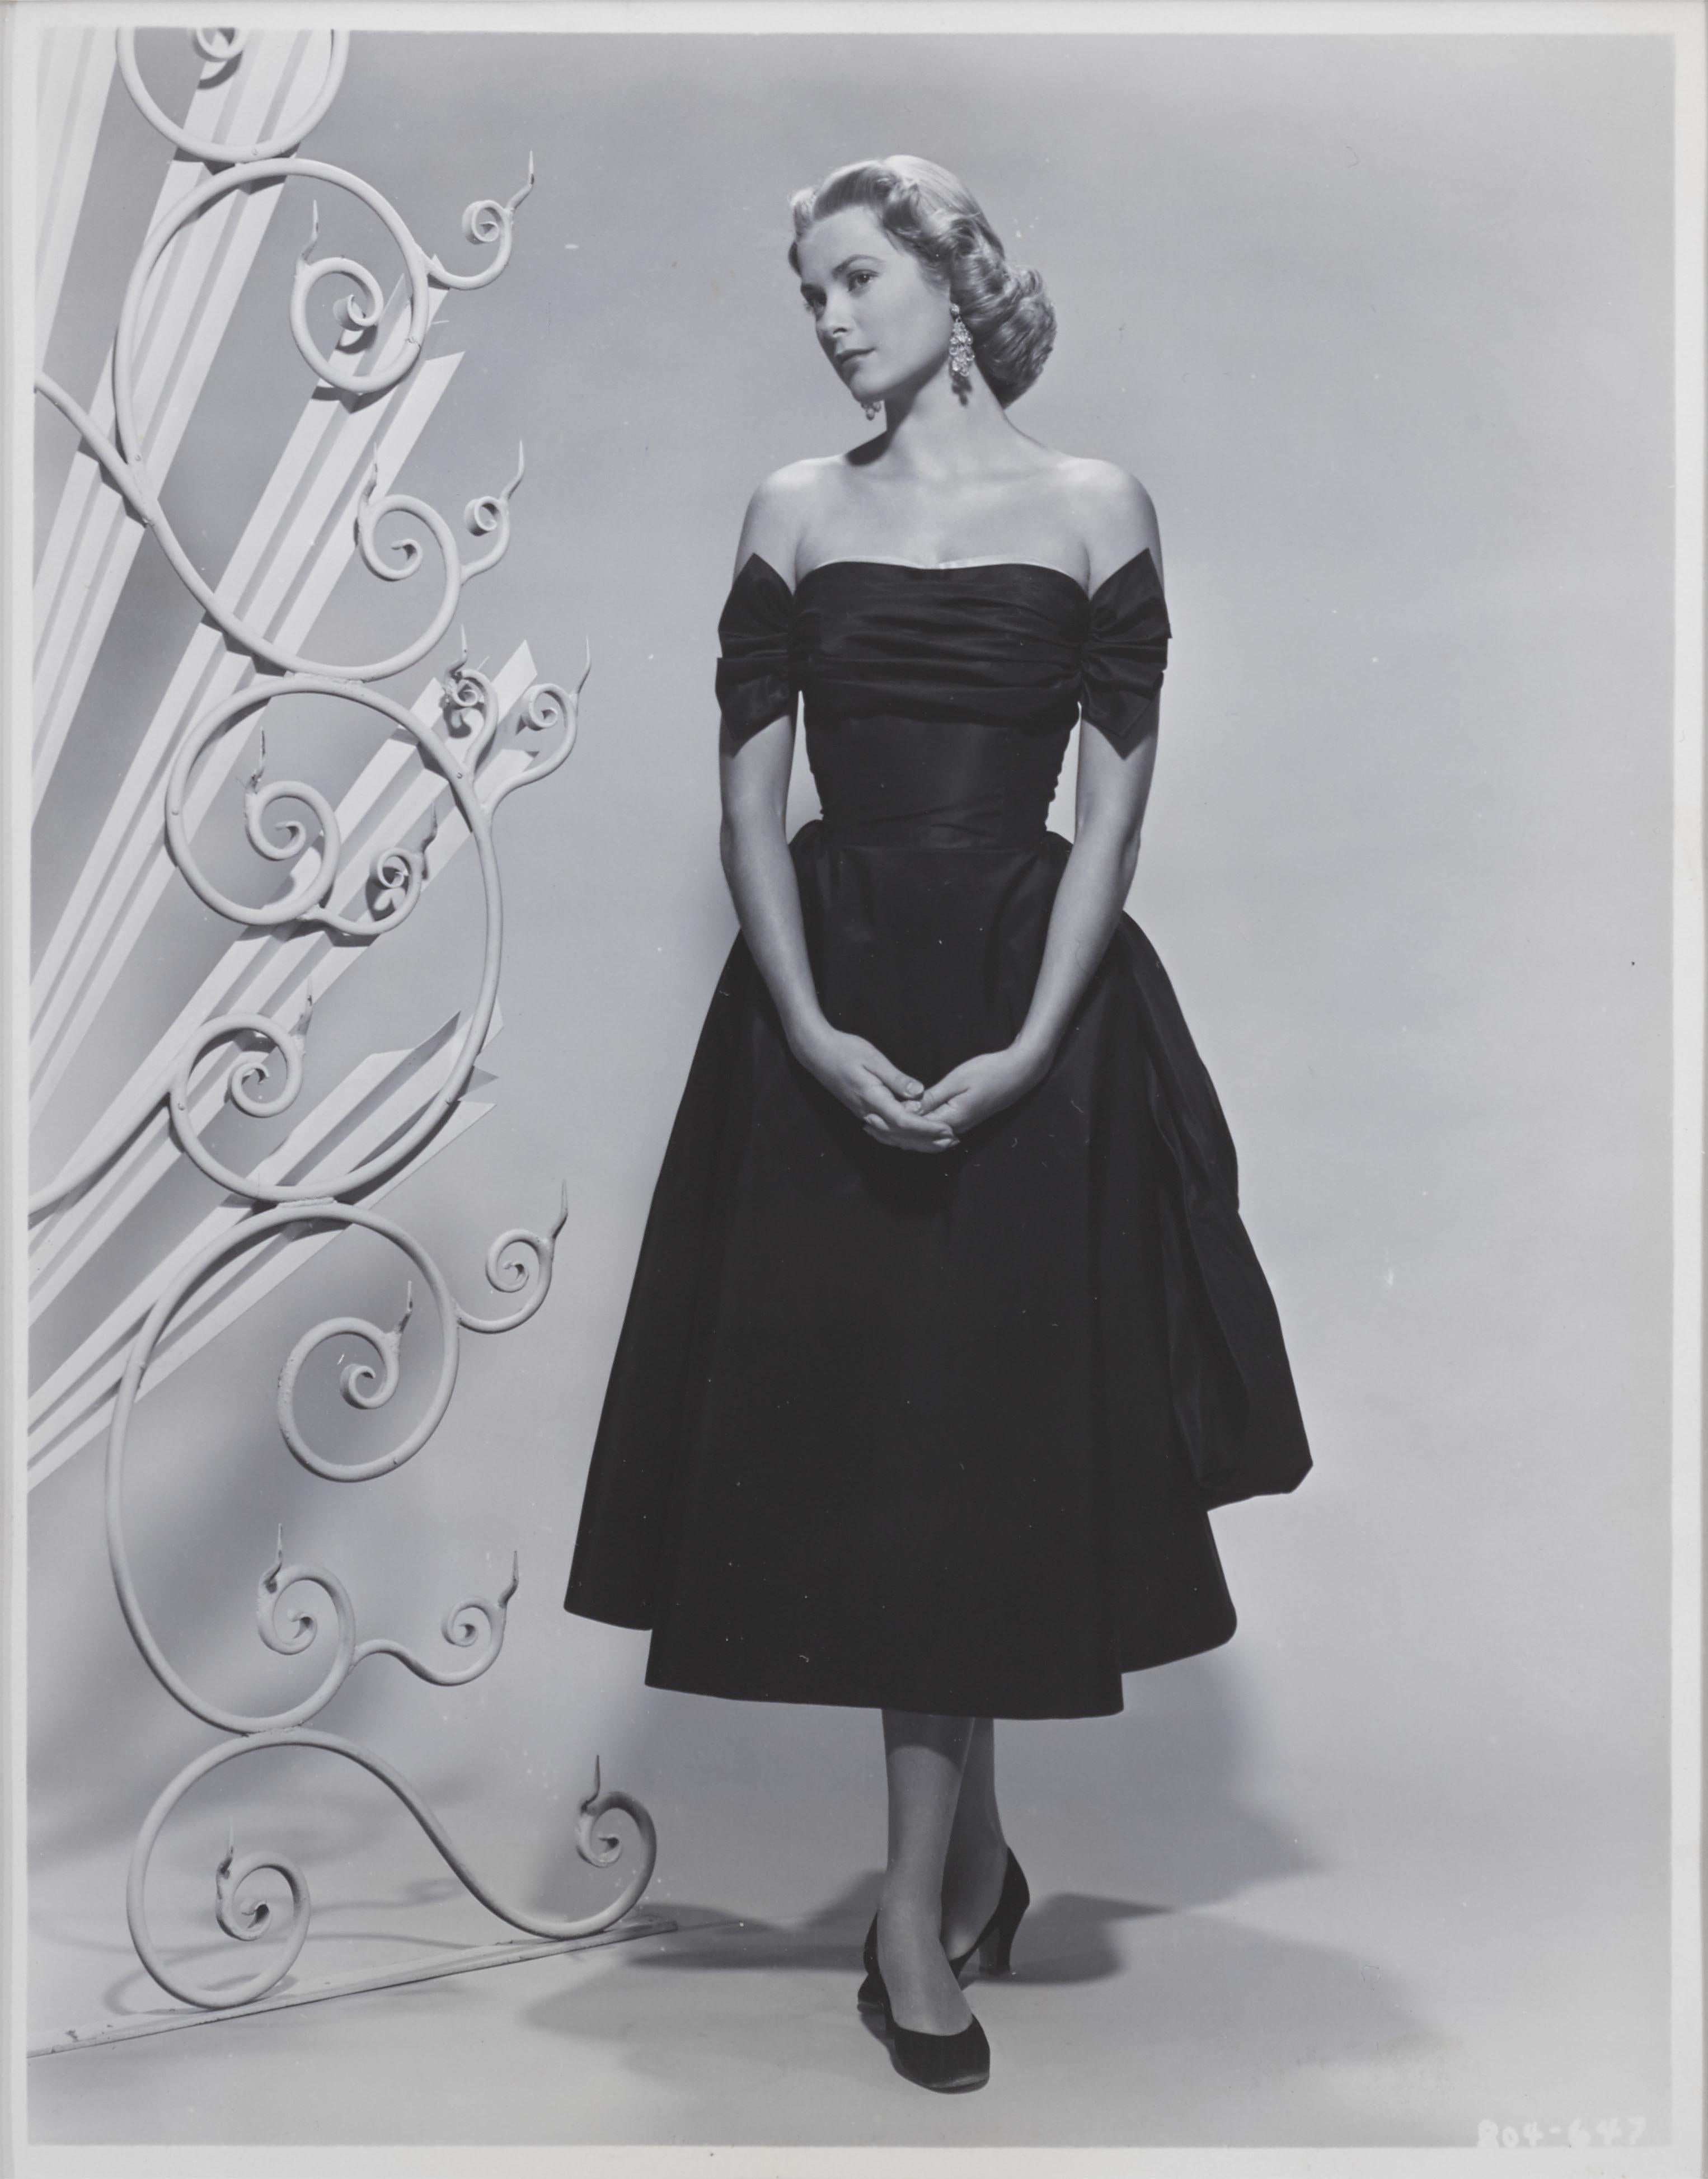 Original Grace Kelly publicity photograph from 1952.
 This production still is conservation framed in an Obeche wood frame with acid free card mounts and UV plexiglass. There is a perspex window on the back of the frame showing information original